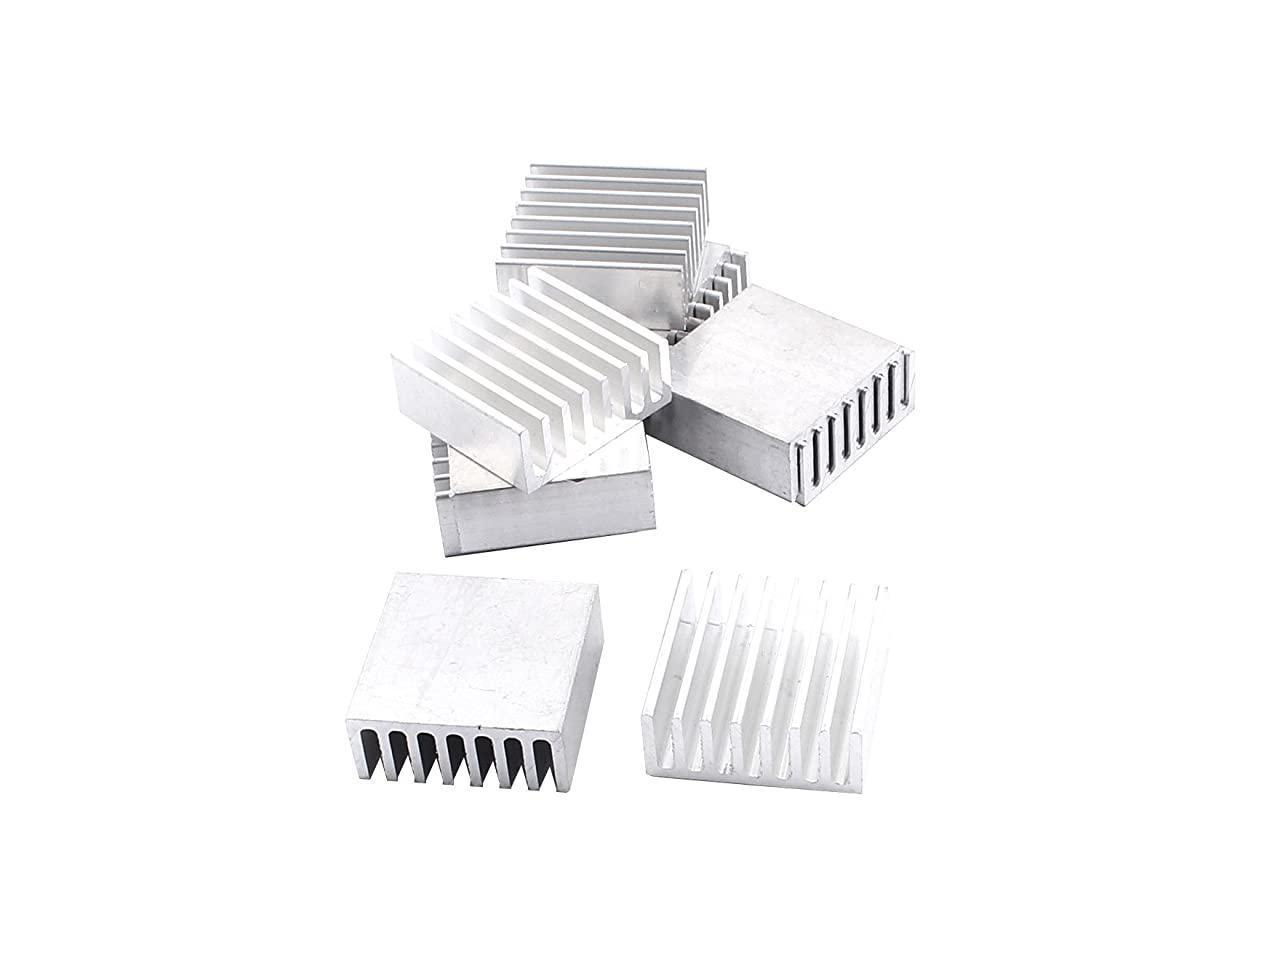 Aluminium Heat Sink Cooling System For Laser 12.7x15.2 